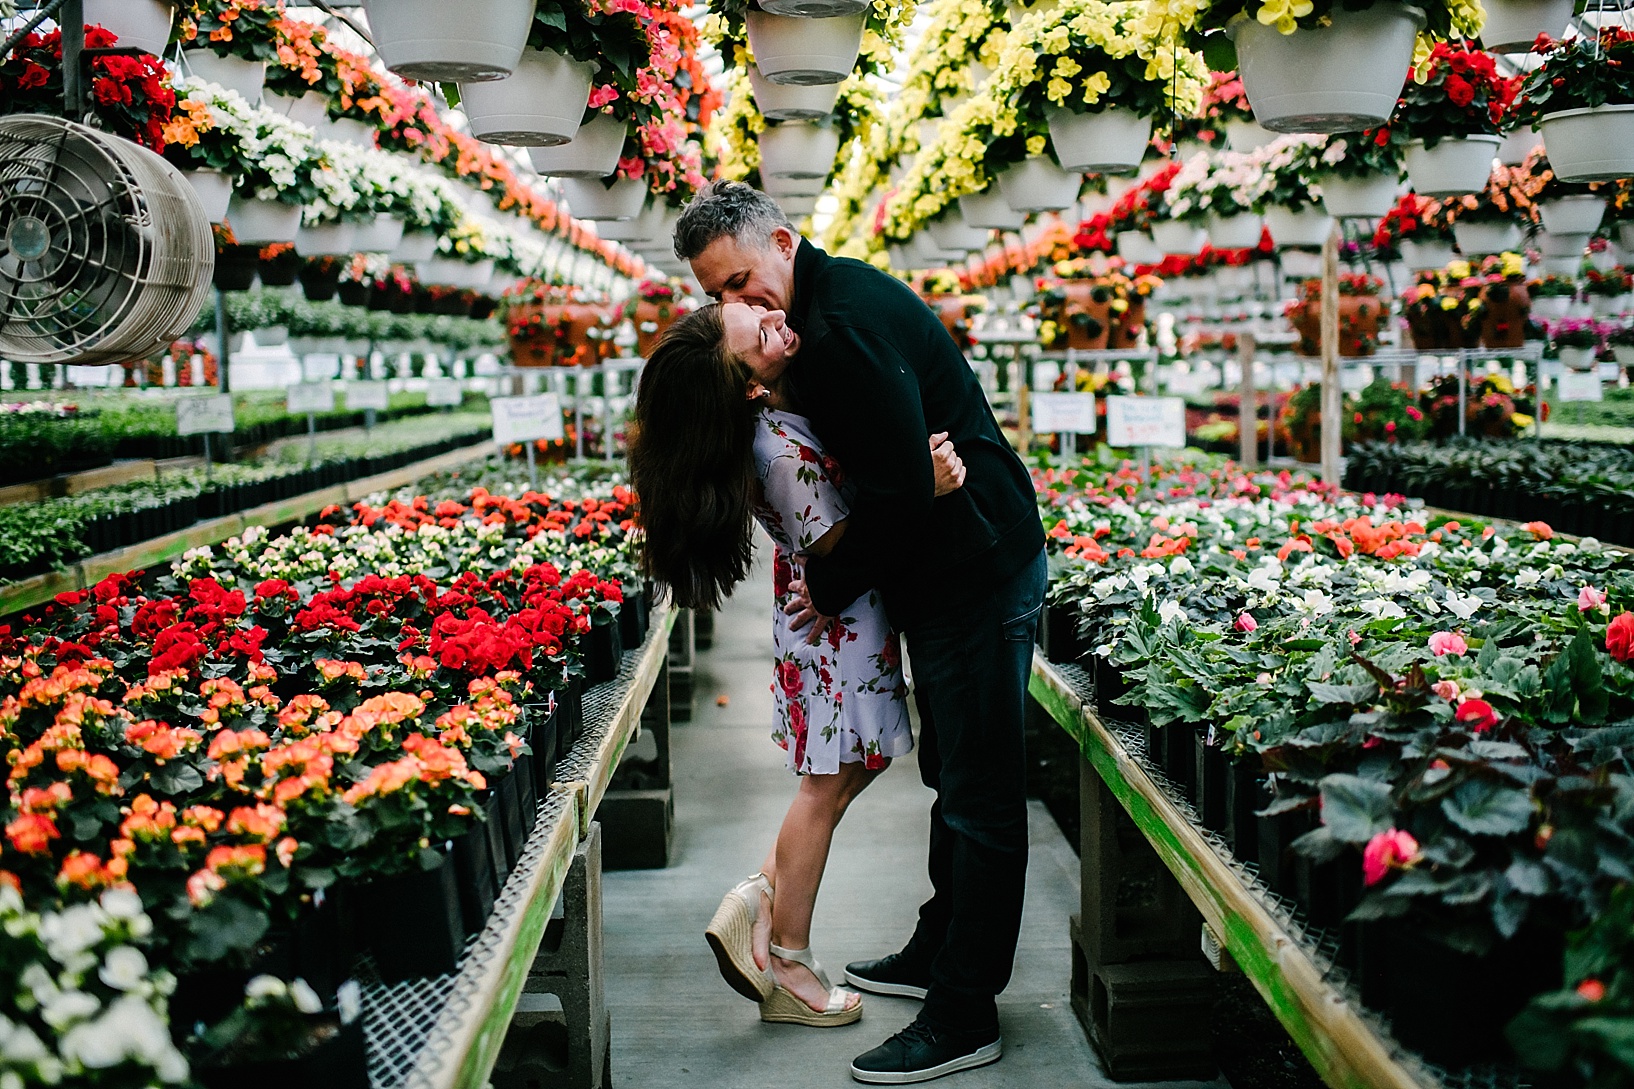 Greenhouse engagement session